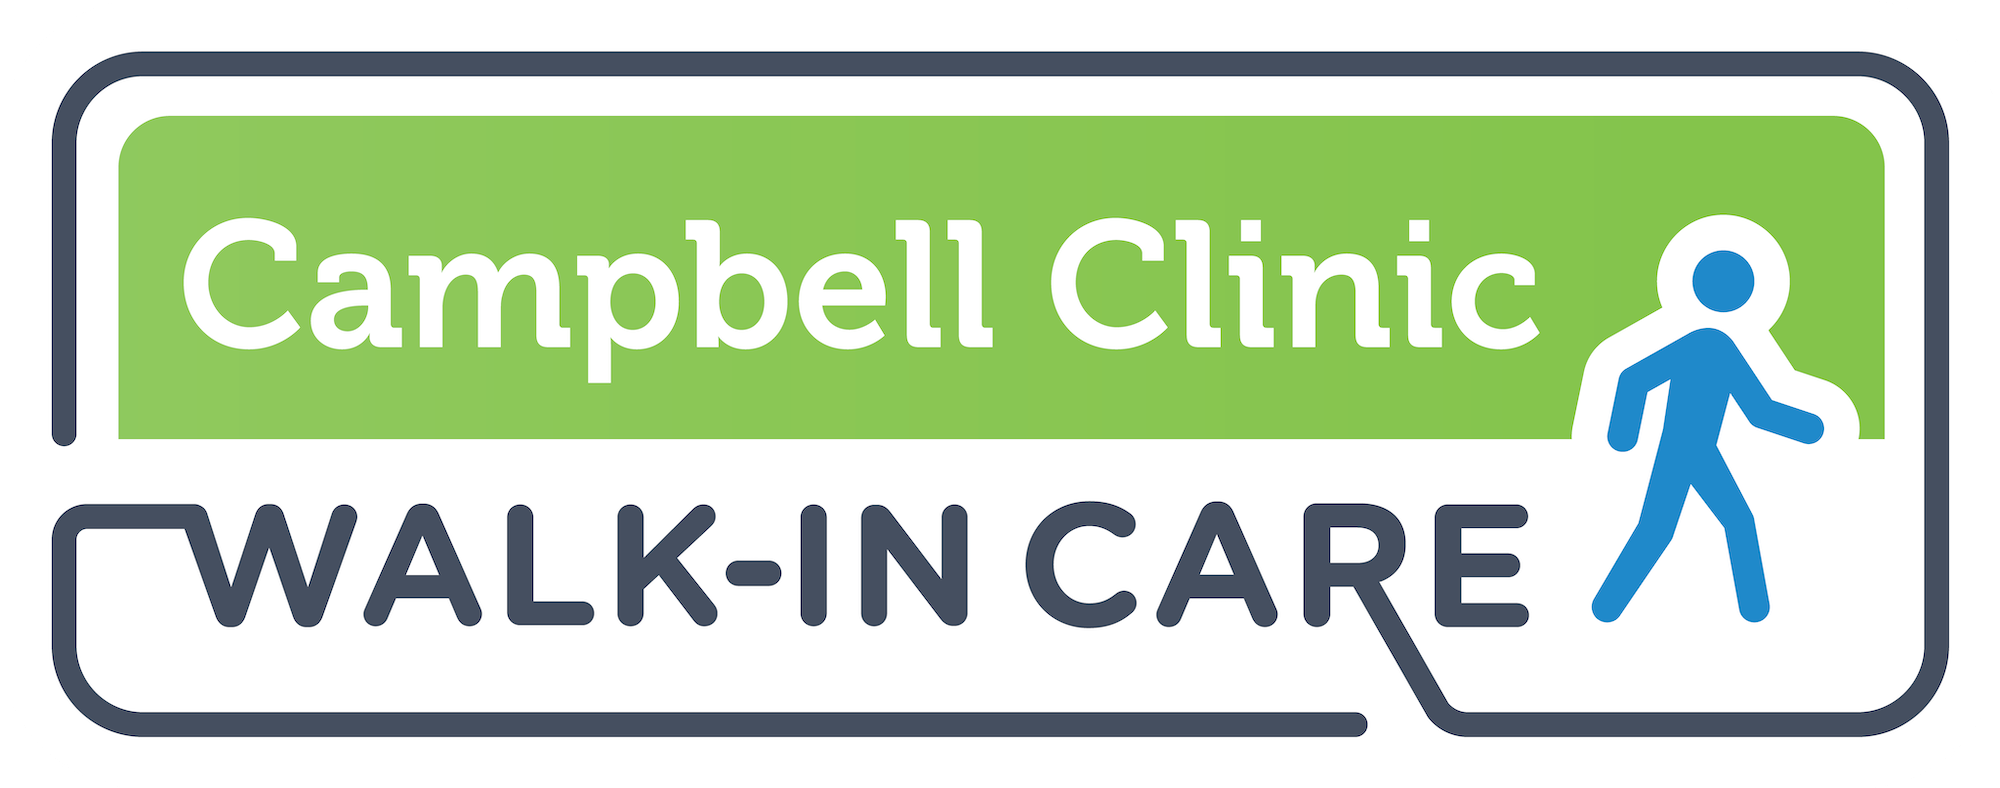 Campbell Clinic Walk-In Care